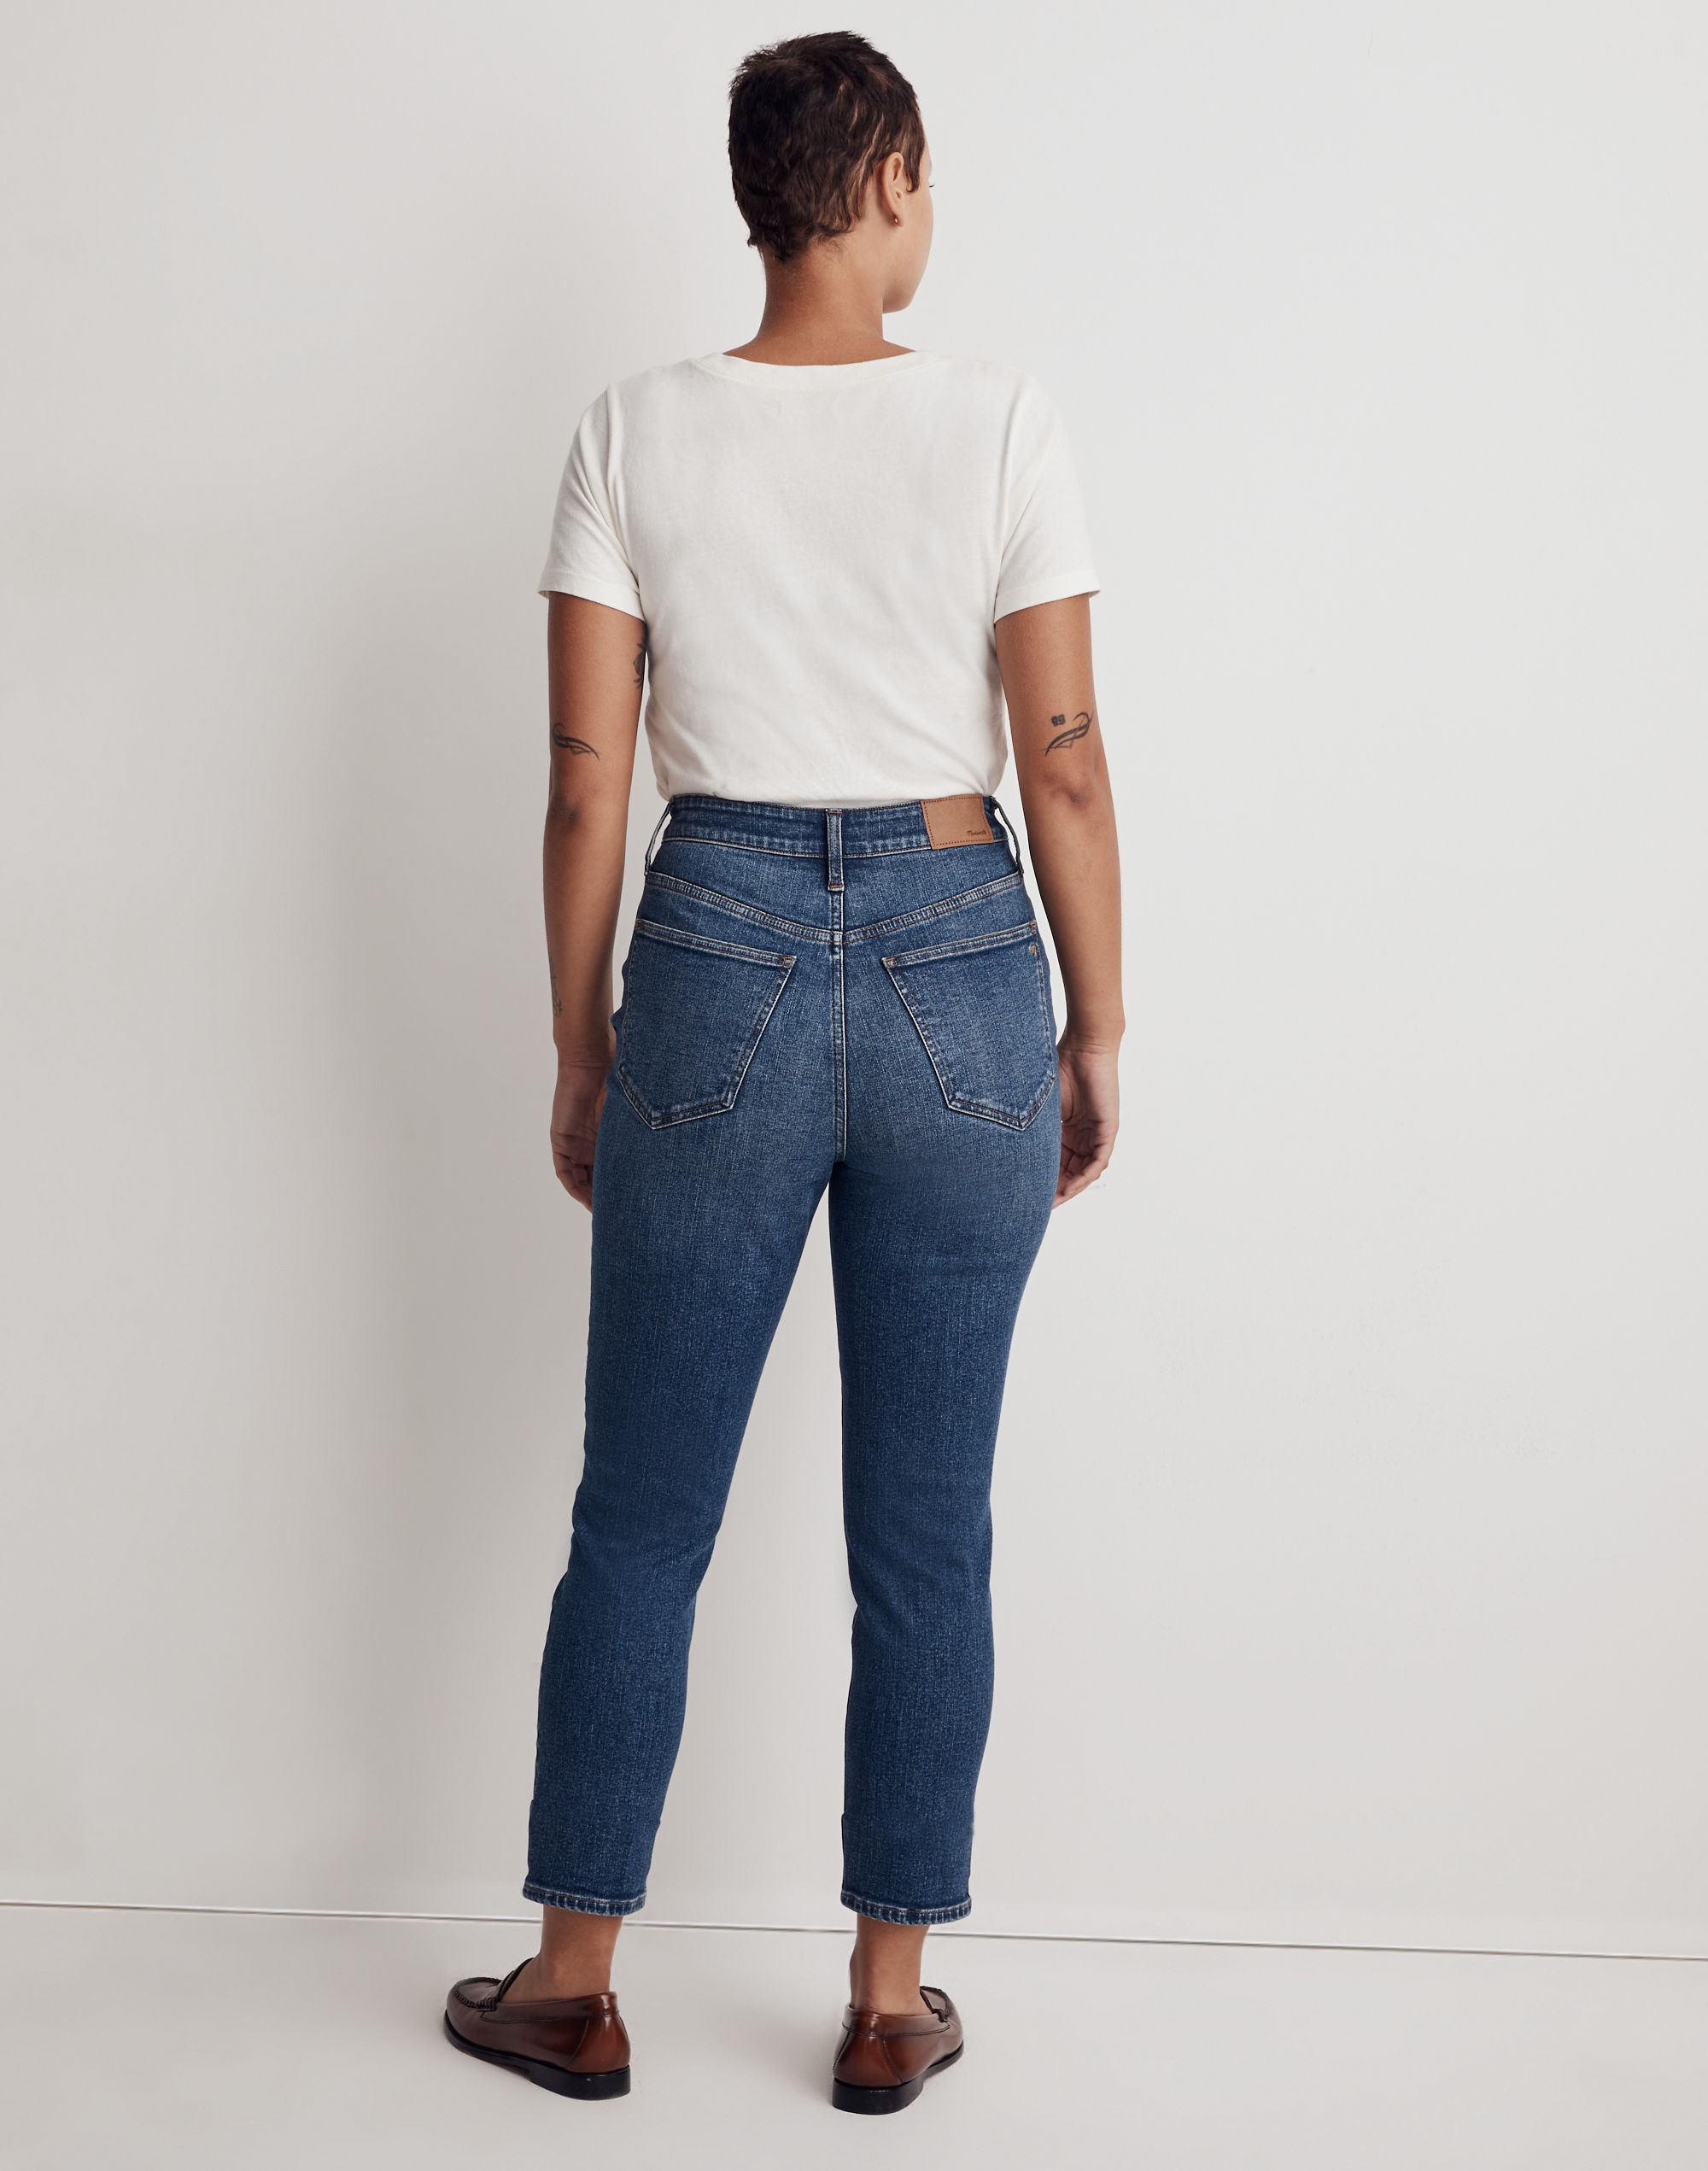 The Curvy Perfect Vintage Jean Manorford Wash: Instacozy Edition